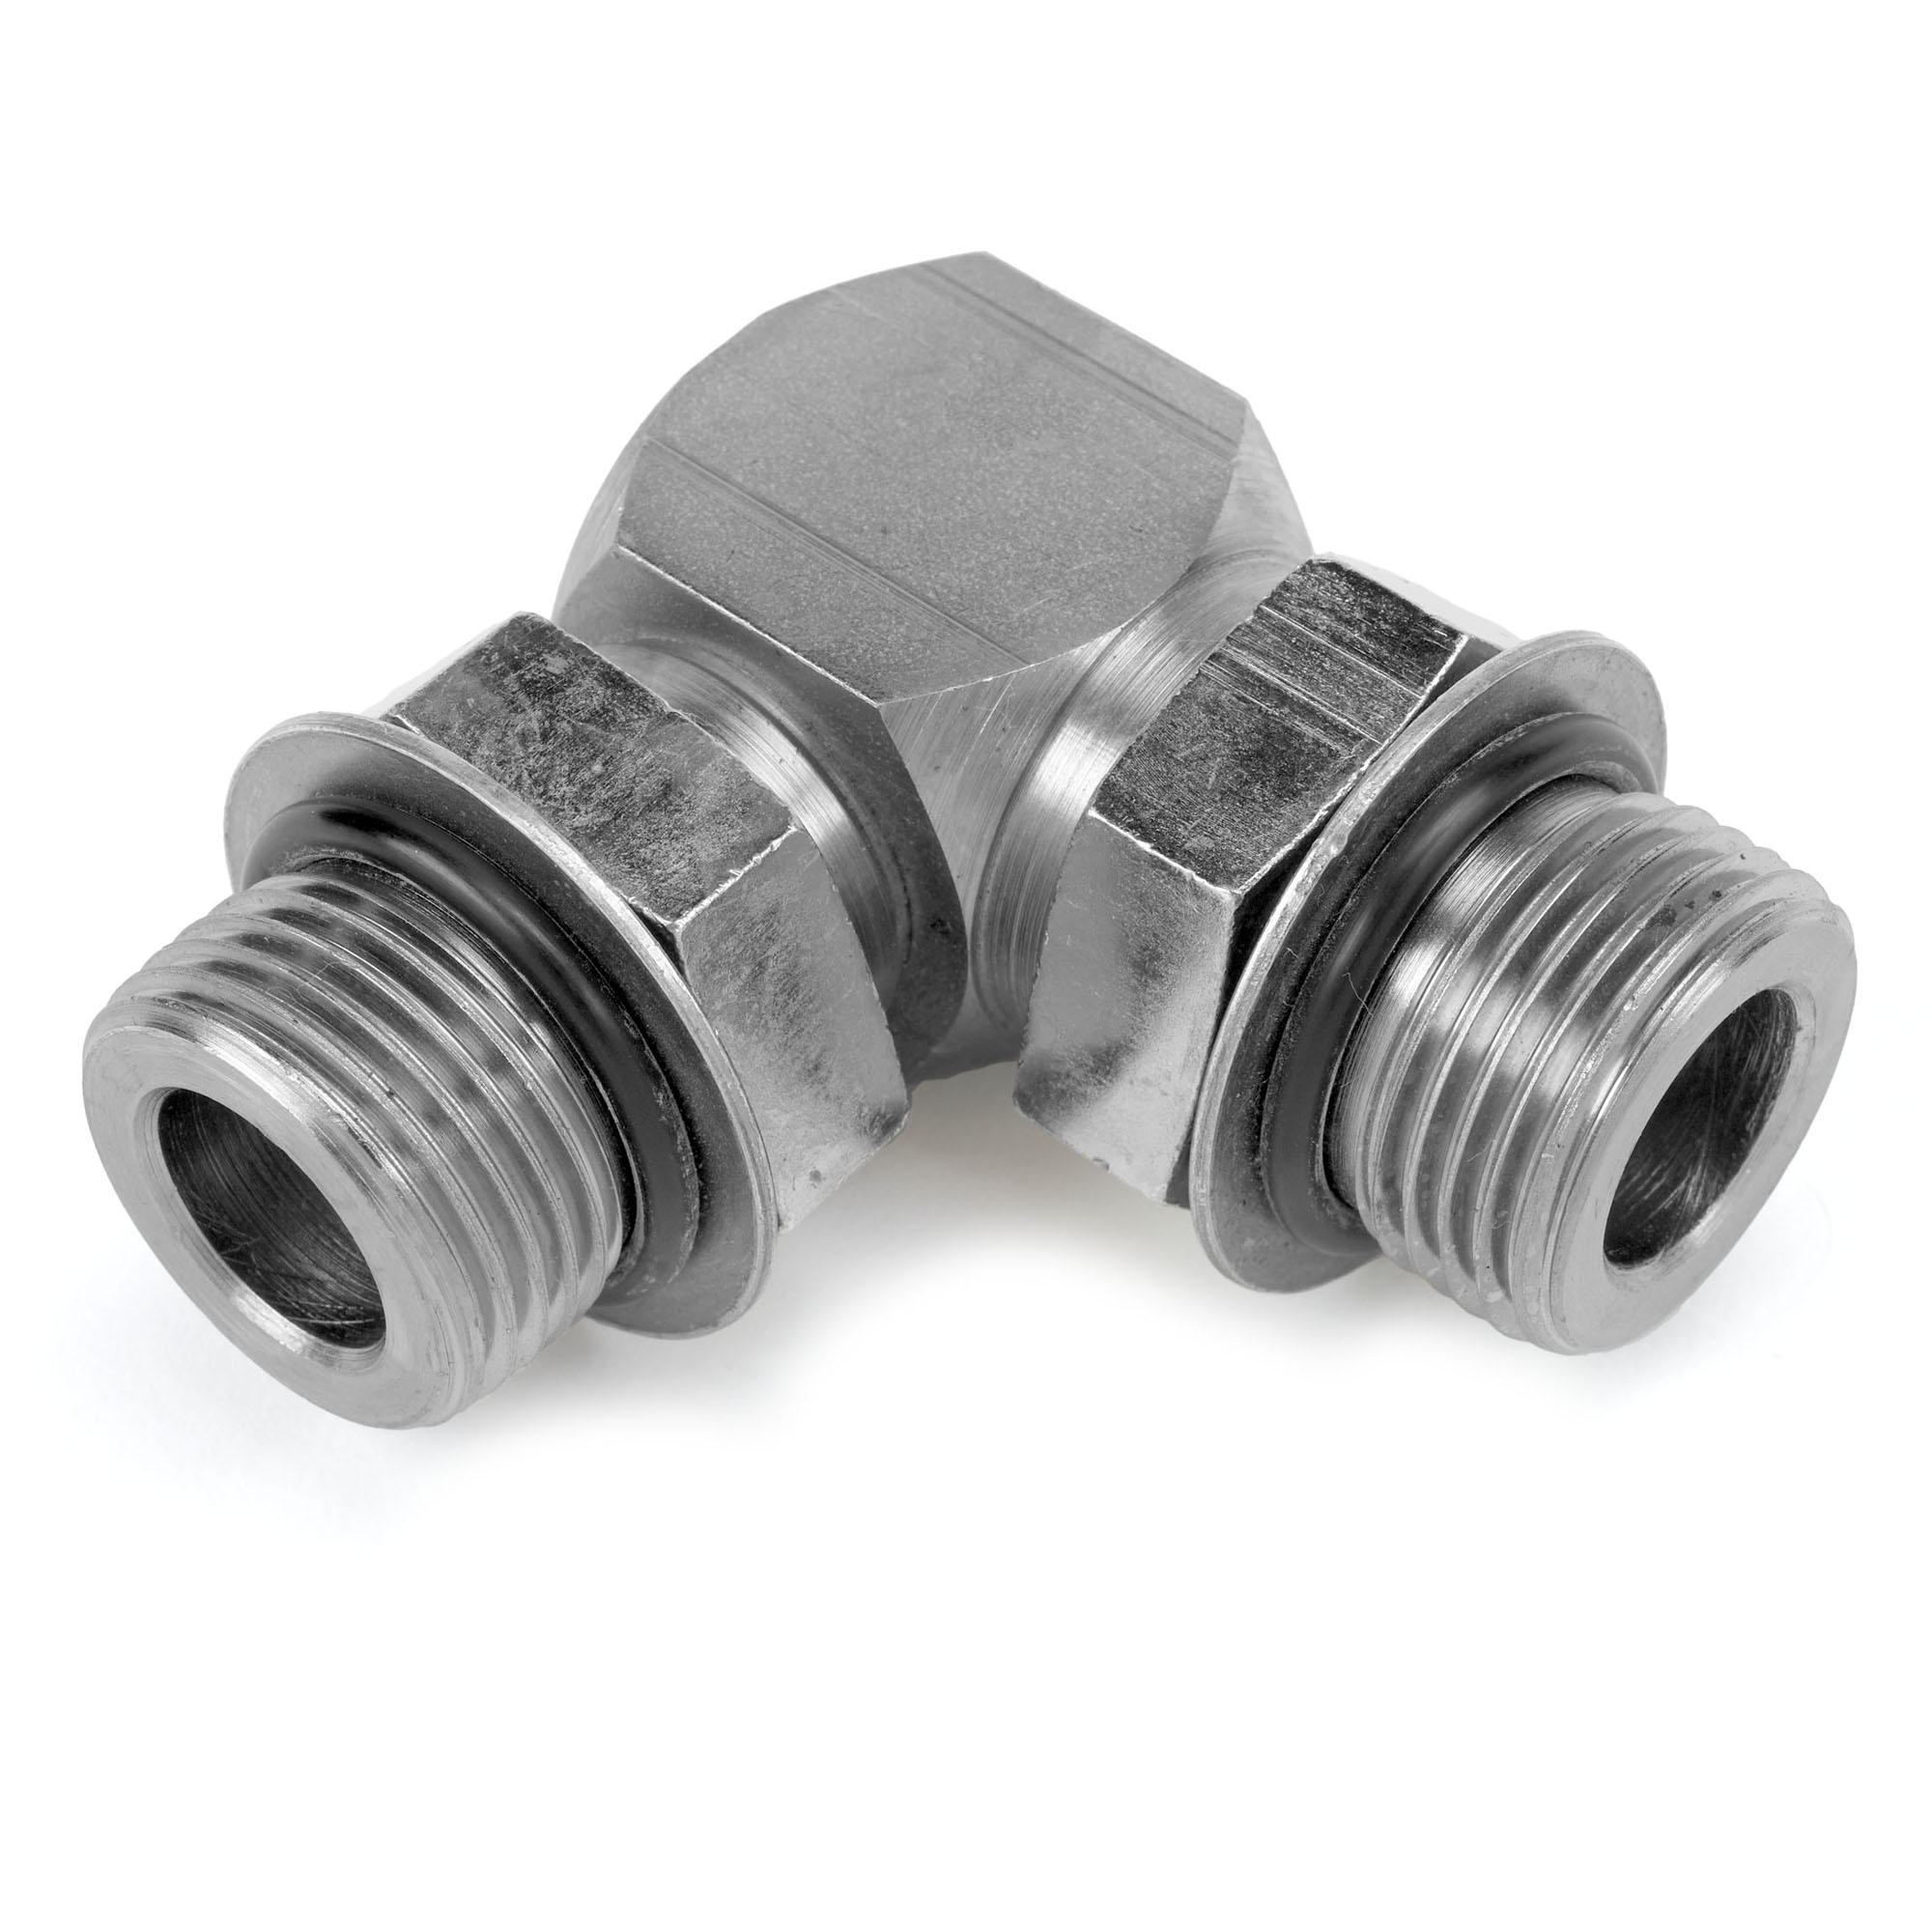 Metric To Standard Pipe Thread Adapters